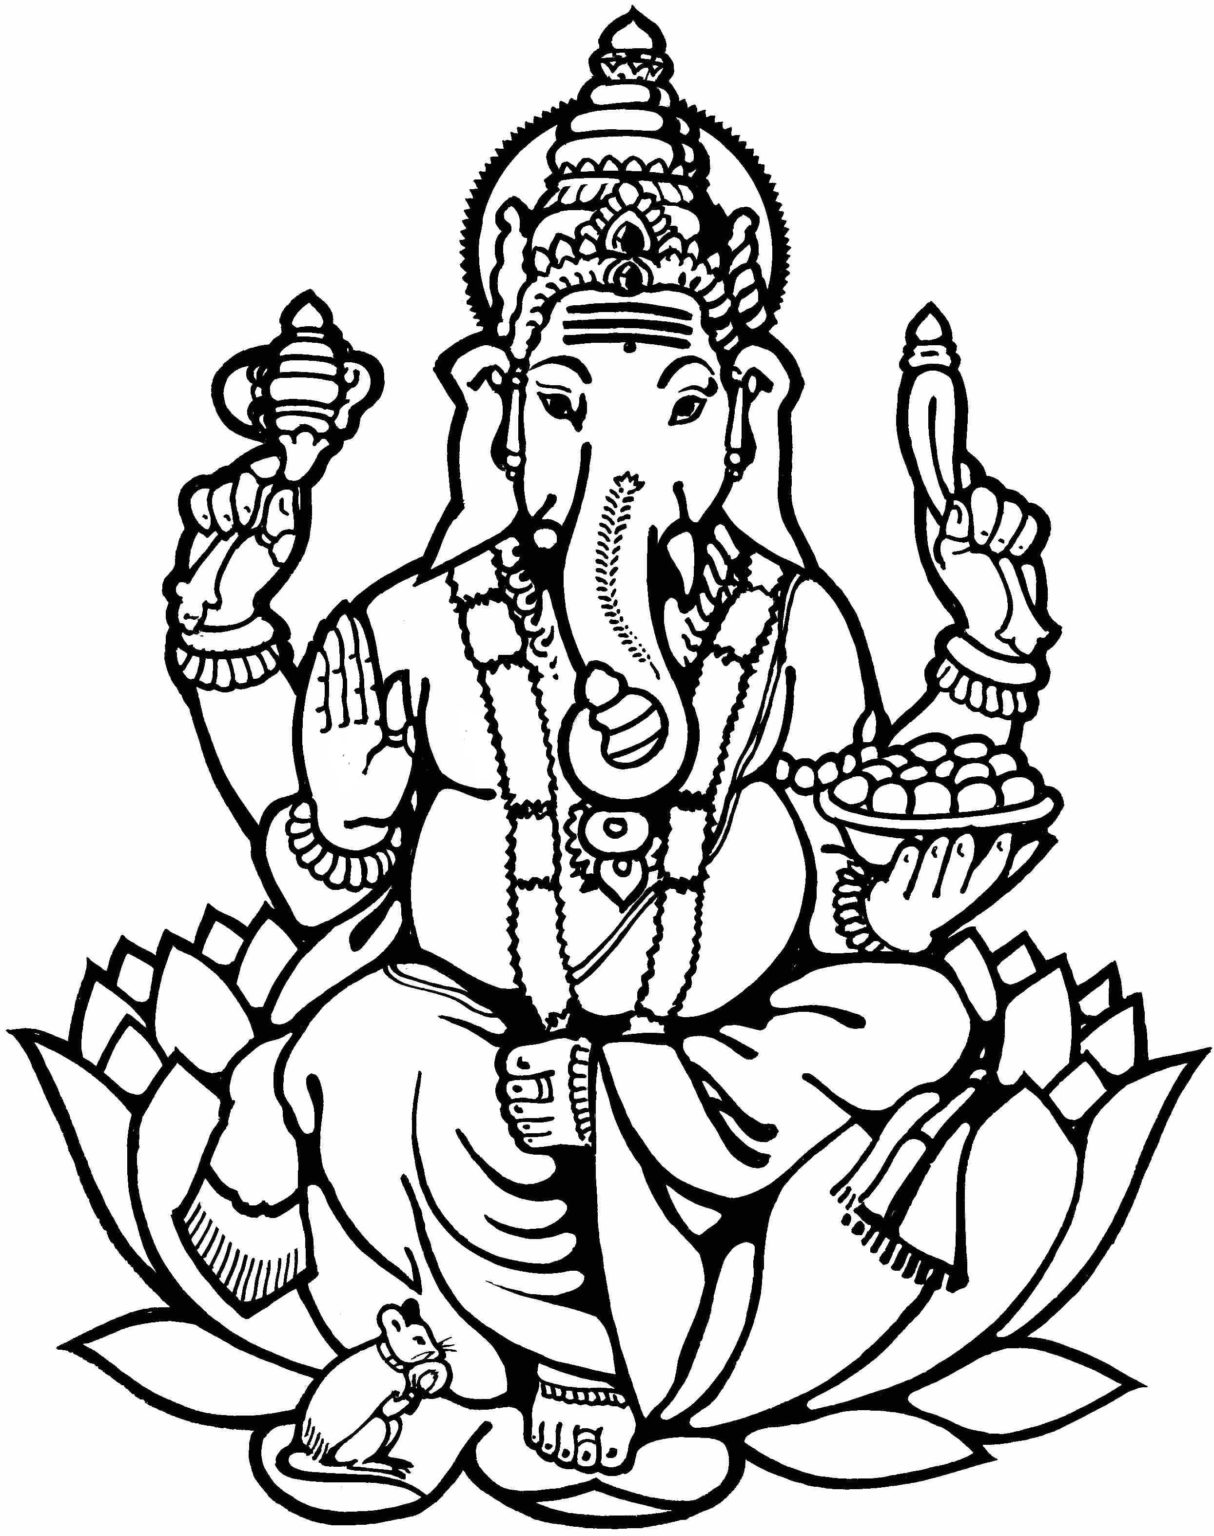 Ganesha Coloring Pages. Print for Free | WONDER DAY — Coloring pages